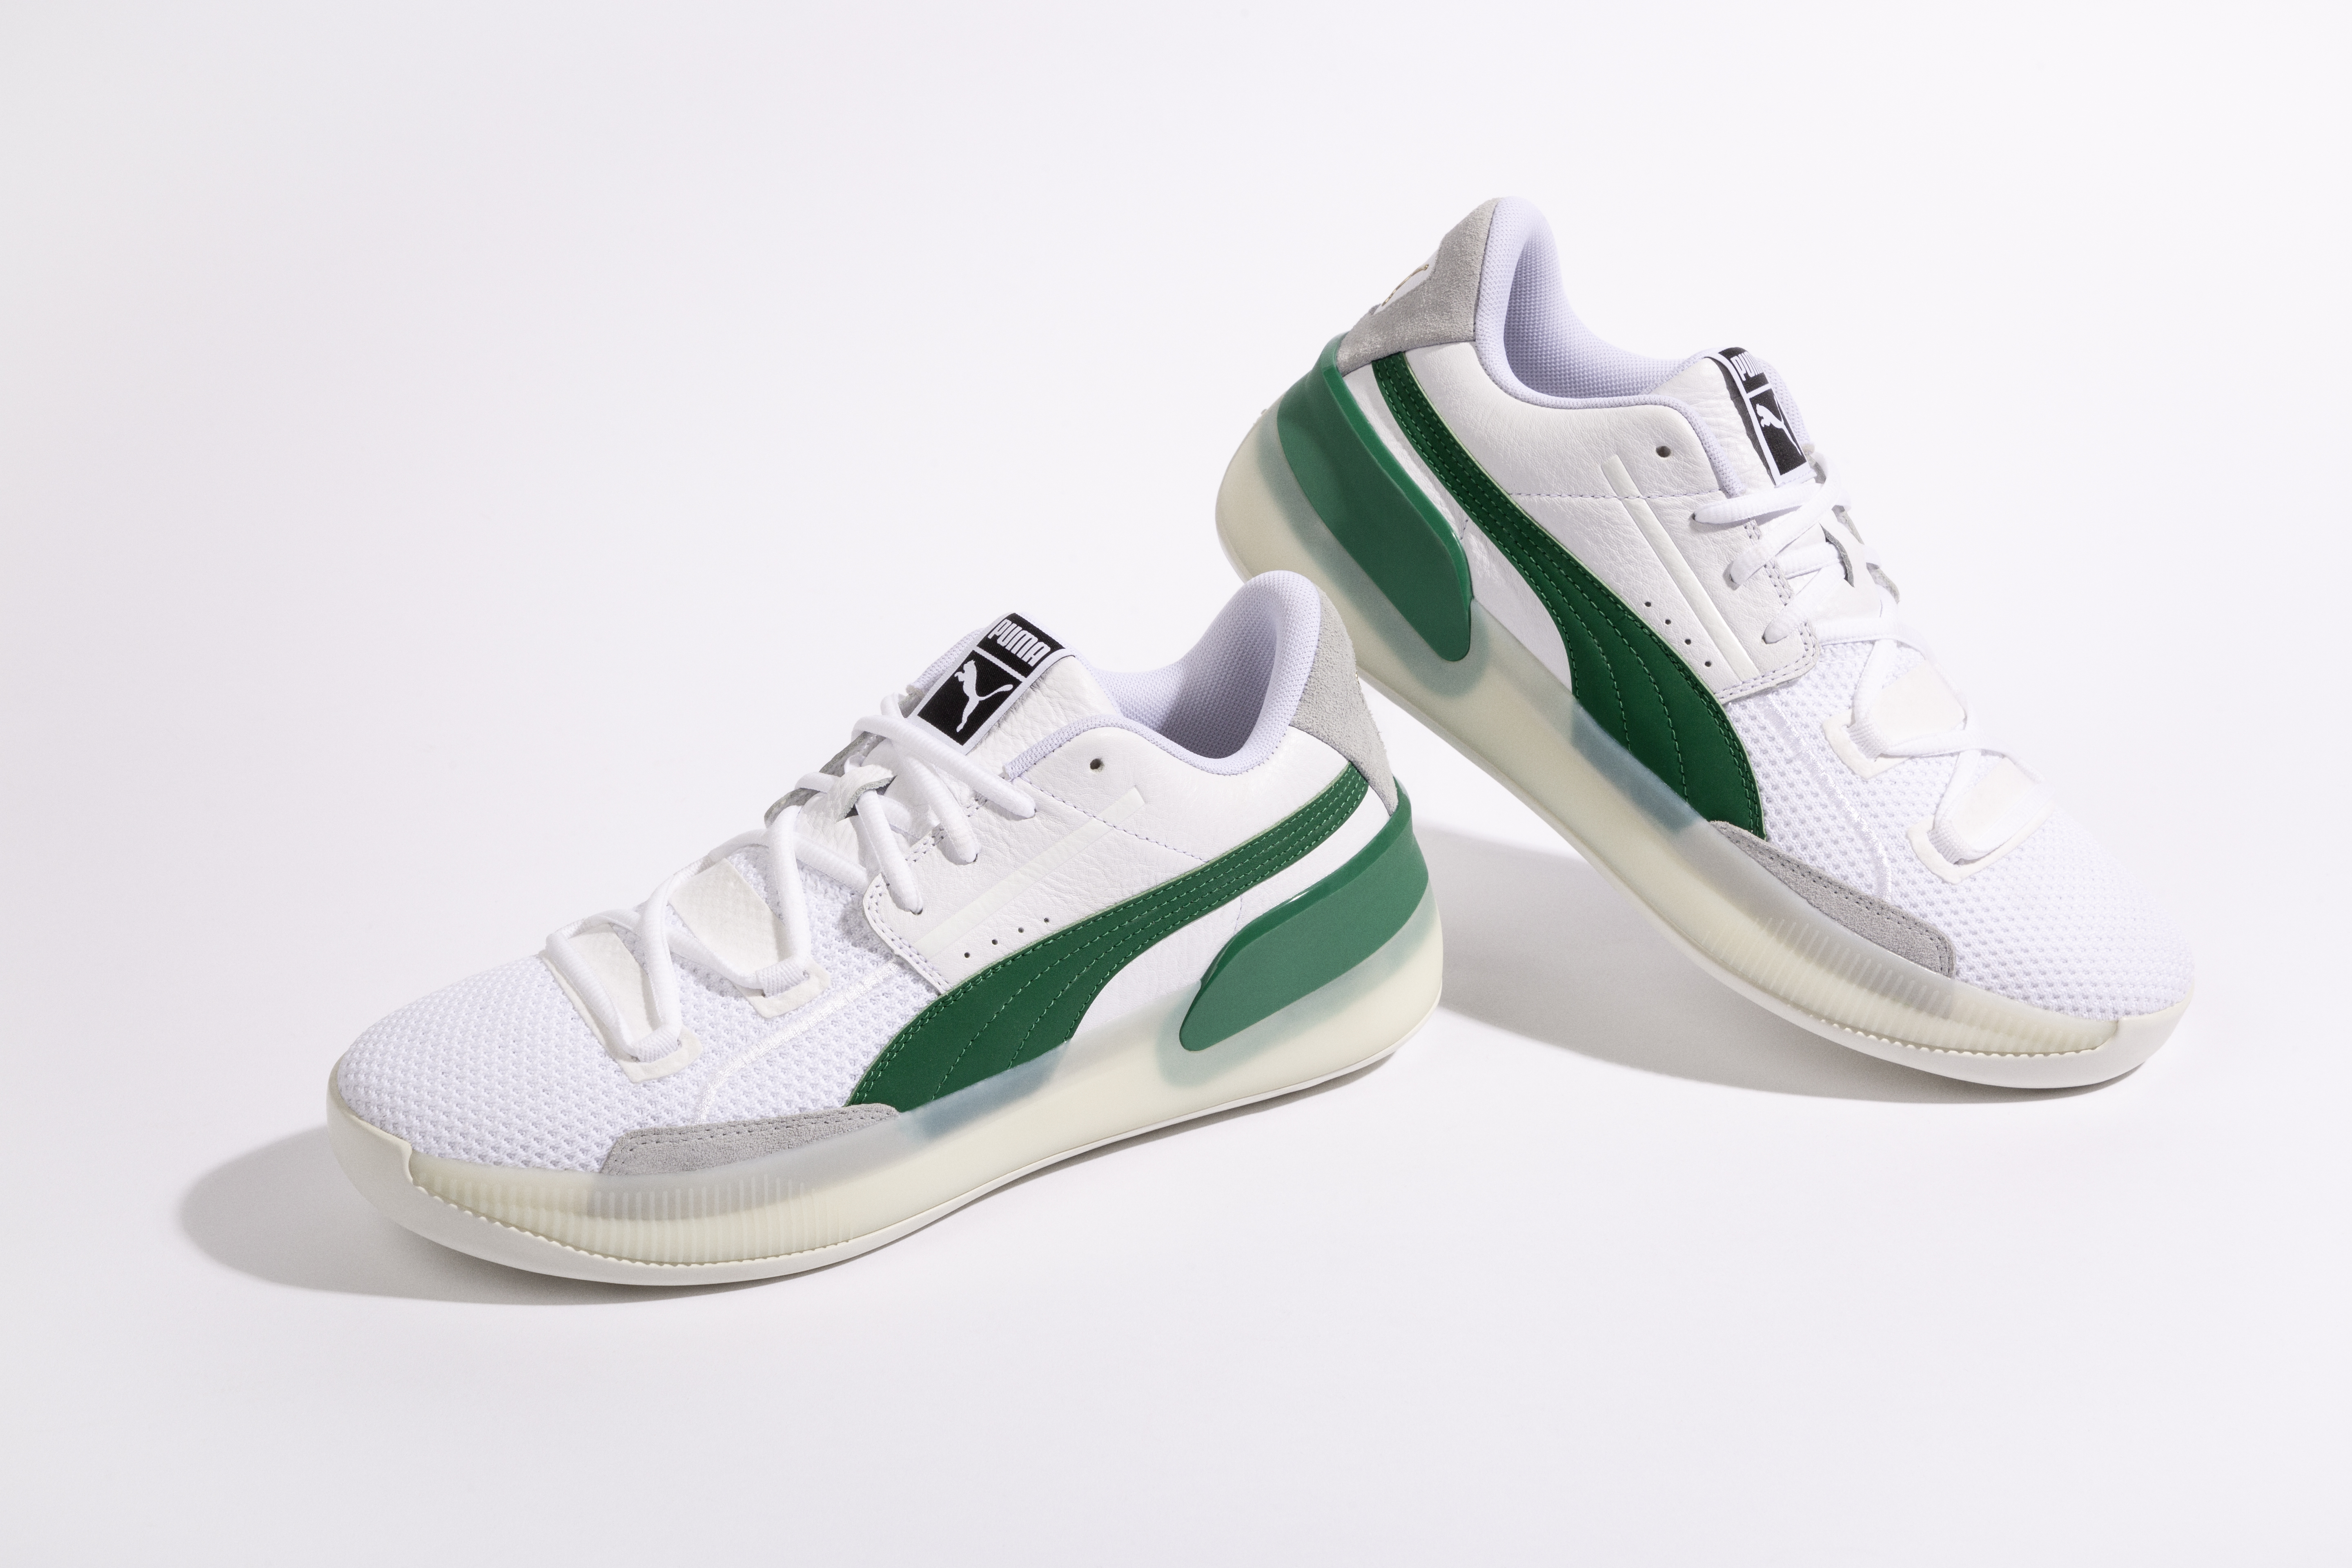 PUMA Debuts New Basketball Sneaker – The Clyde Hardwood In NYC ...